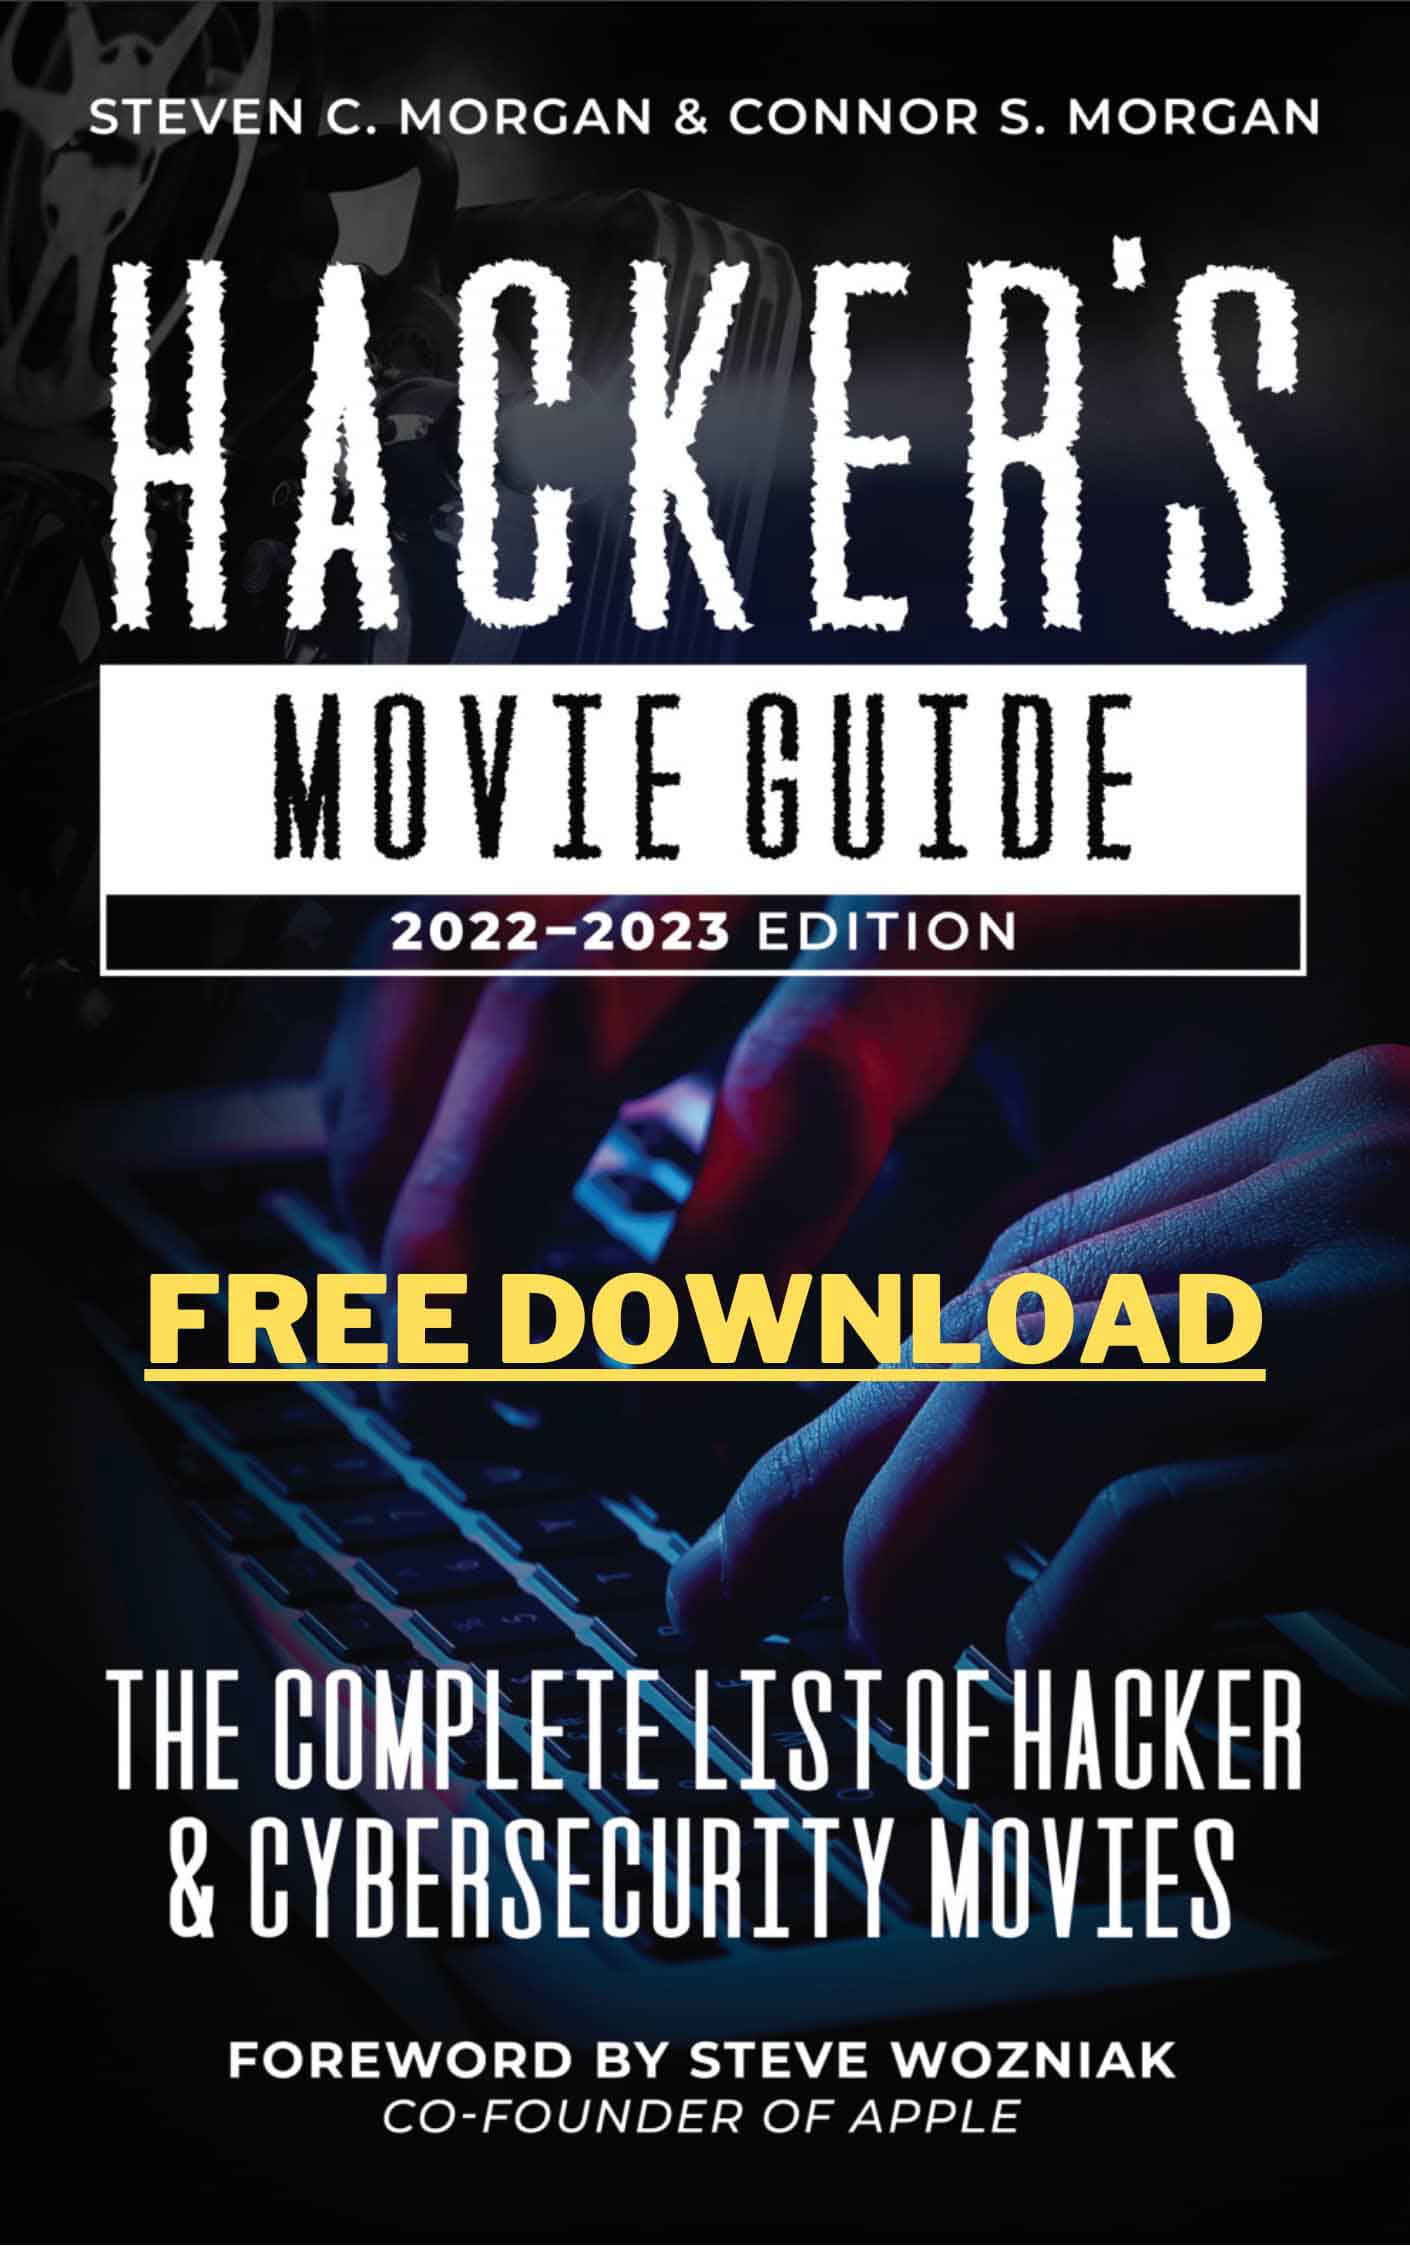 The Complete List of Hacker And Cybersecurity Movies